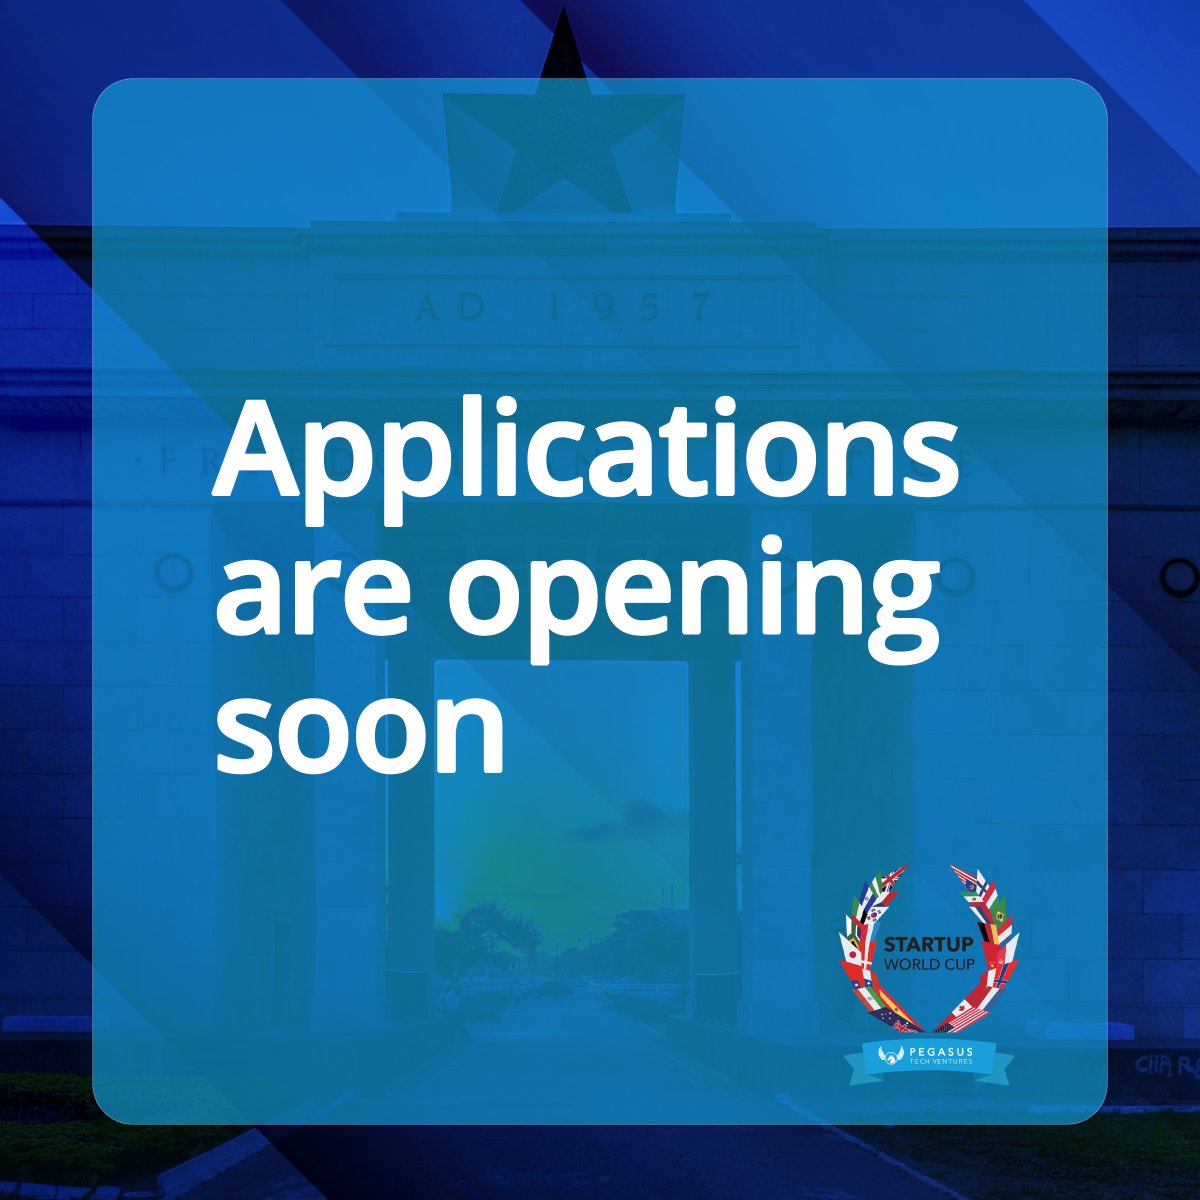 Applications are opening soon!

#applications #openingsoon #ourdatatoday #forthefuture #startup #pegasusp #pitch #funding #startupworldcup #startupghana #innovation #entrepreneurship #startupWCghana #SWC #SWC2024